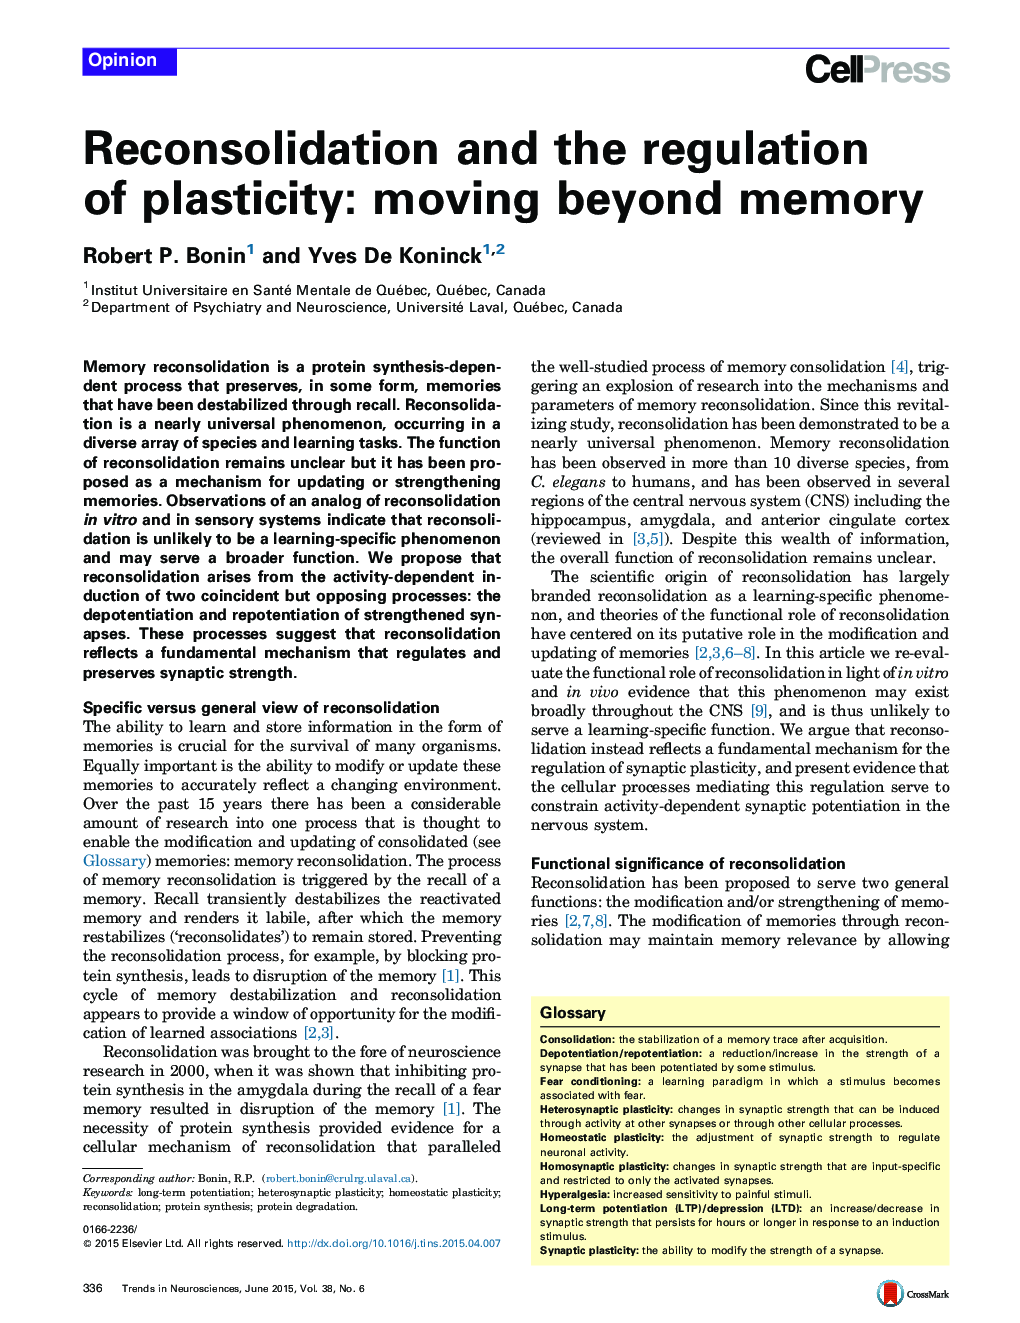 Reconsolidation and the regulation of plasticity: moving beyond memory